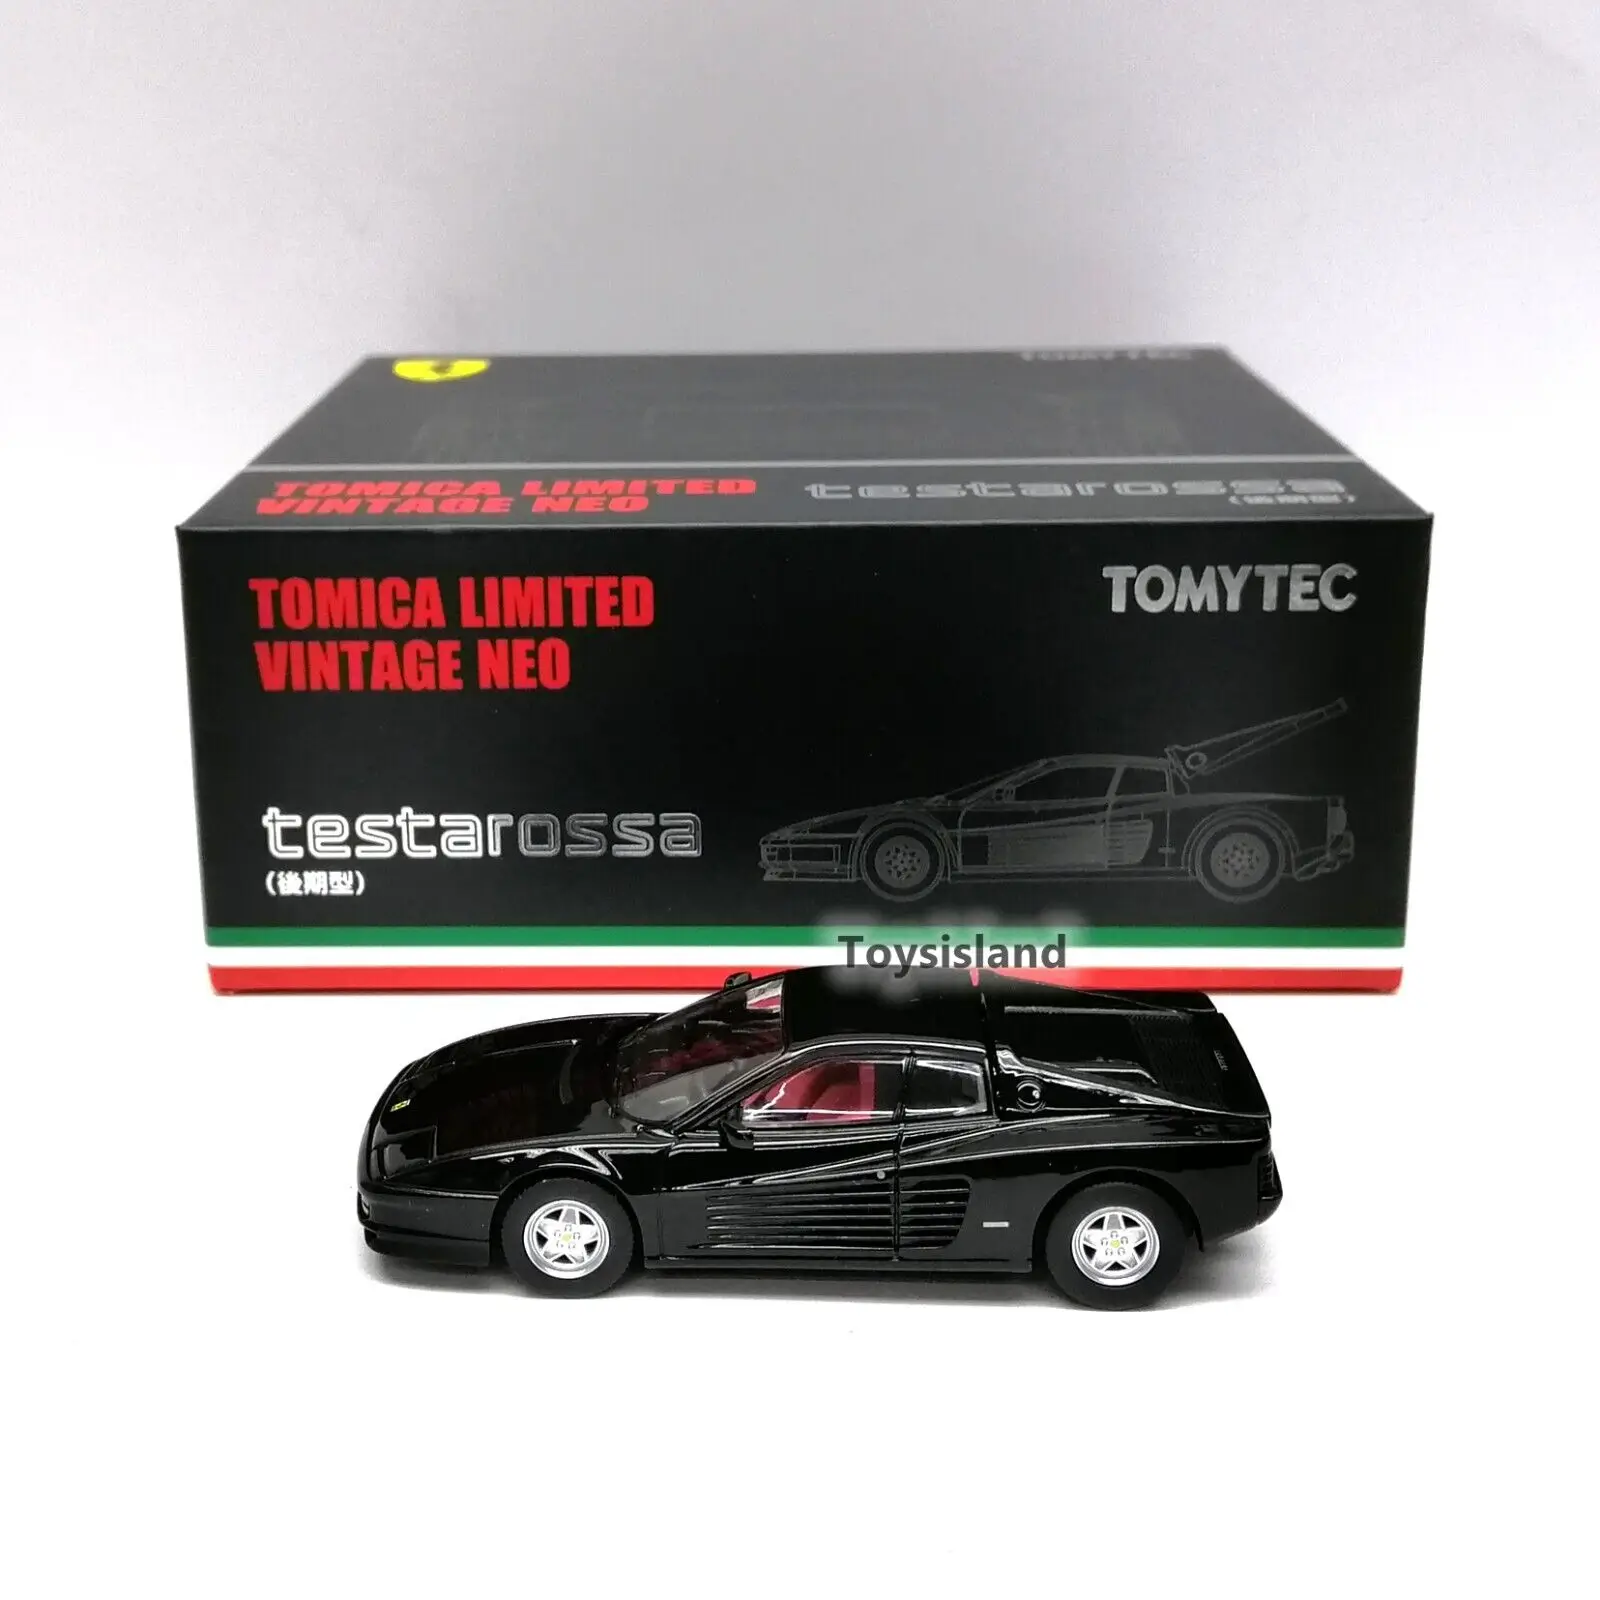 

Tomica Limited Vintage NEO TLV Testarossa ( Late type ) TOMYTEC LV BLACK DieCast Model Car Collection Limited Edition Hobby Toys